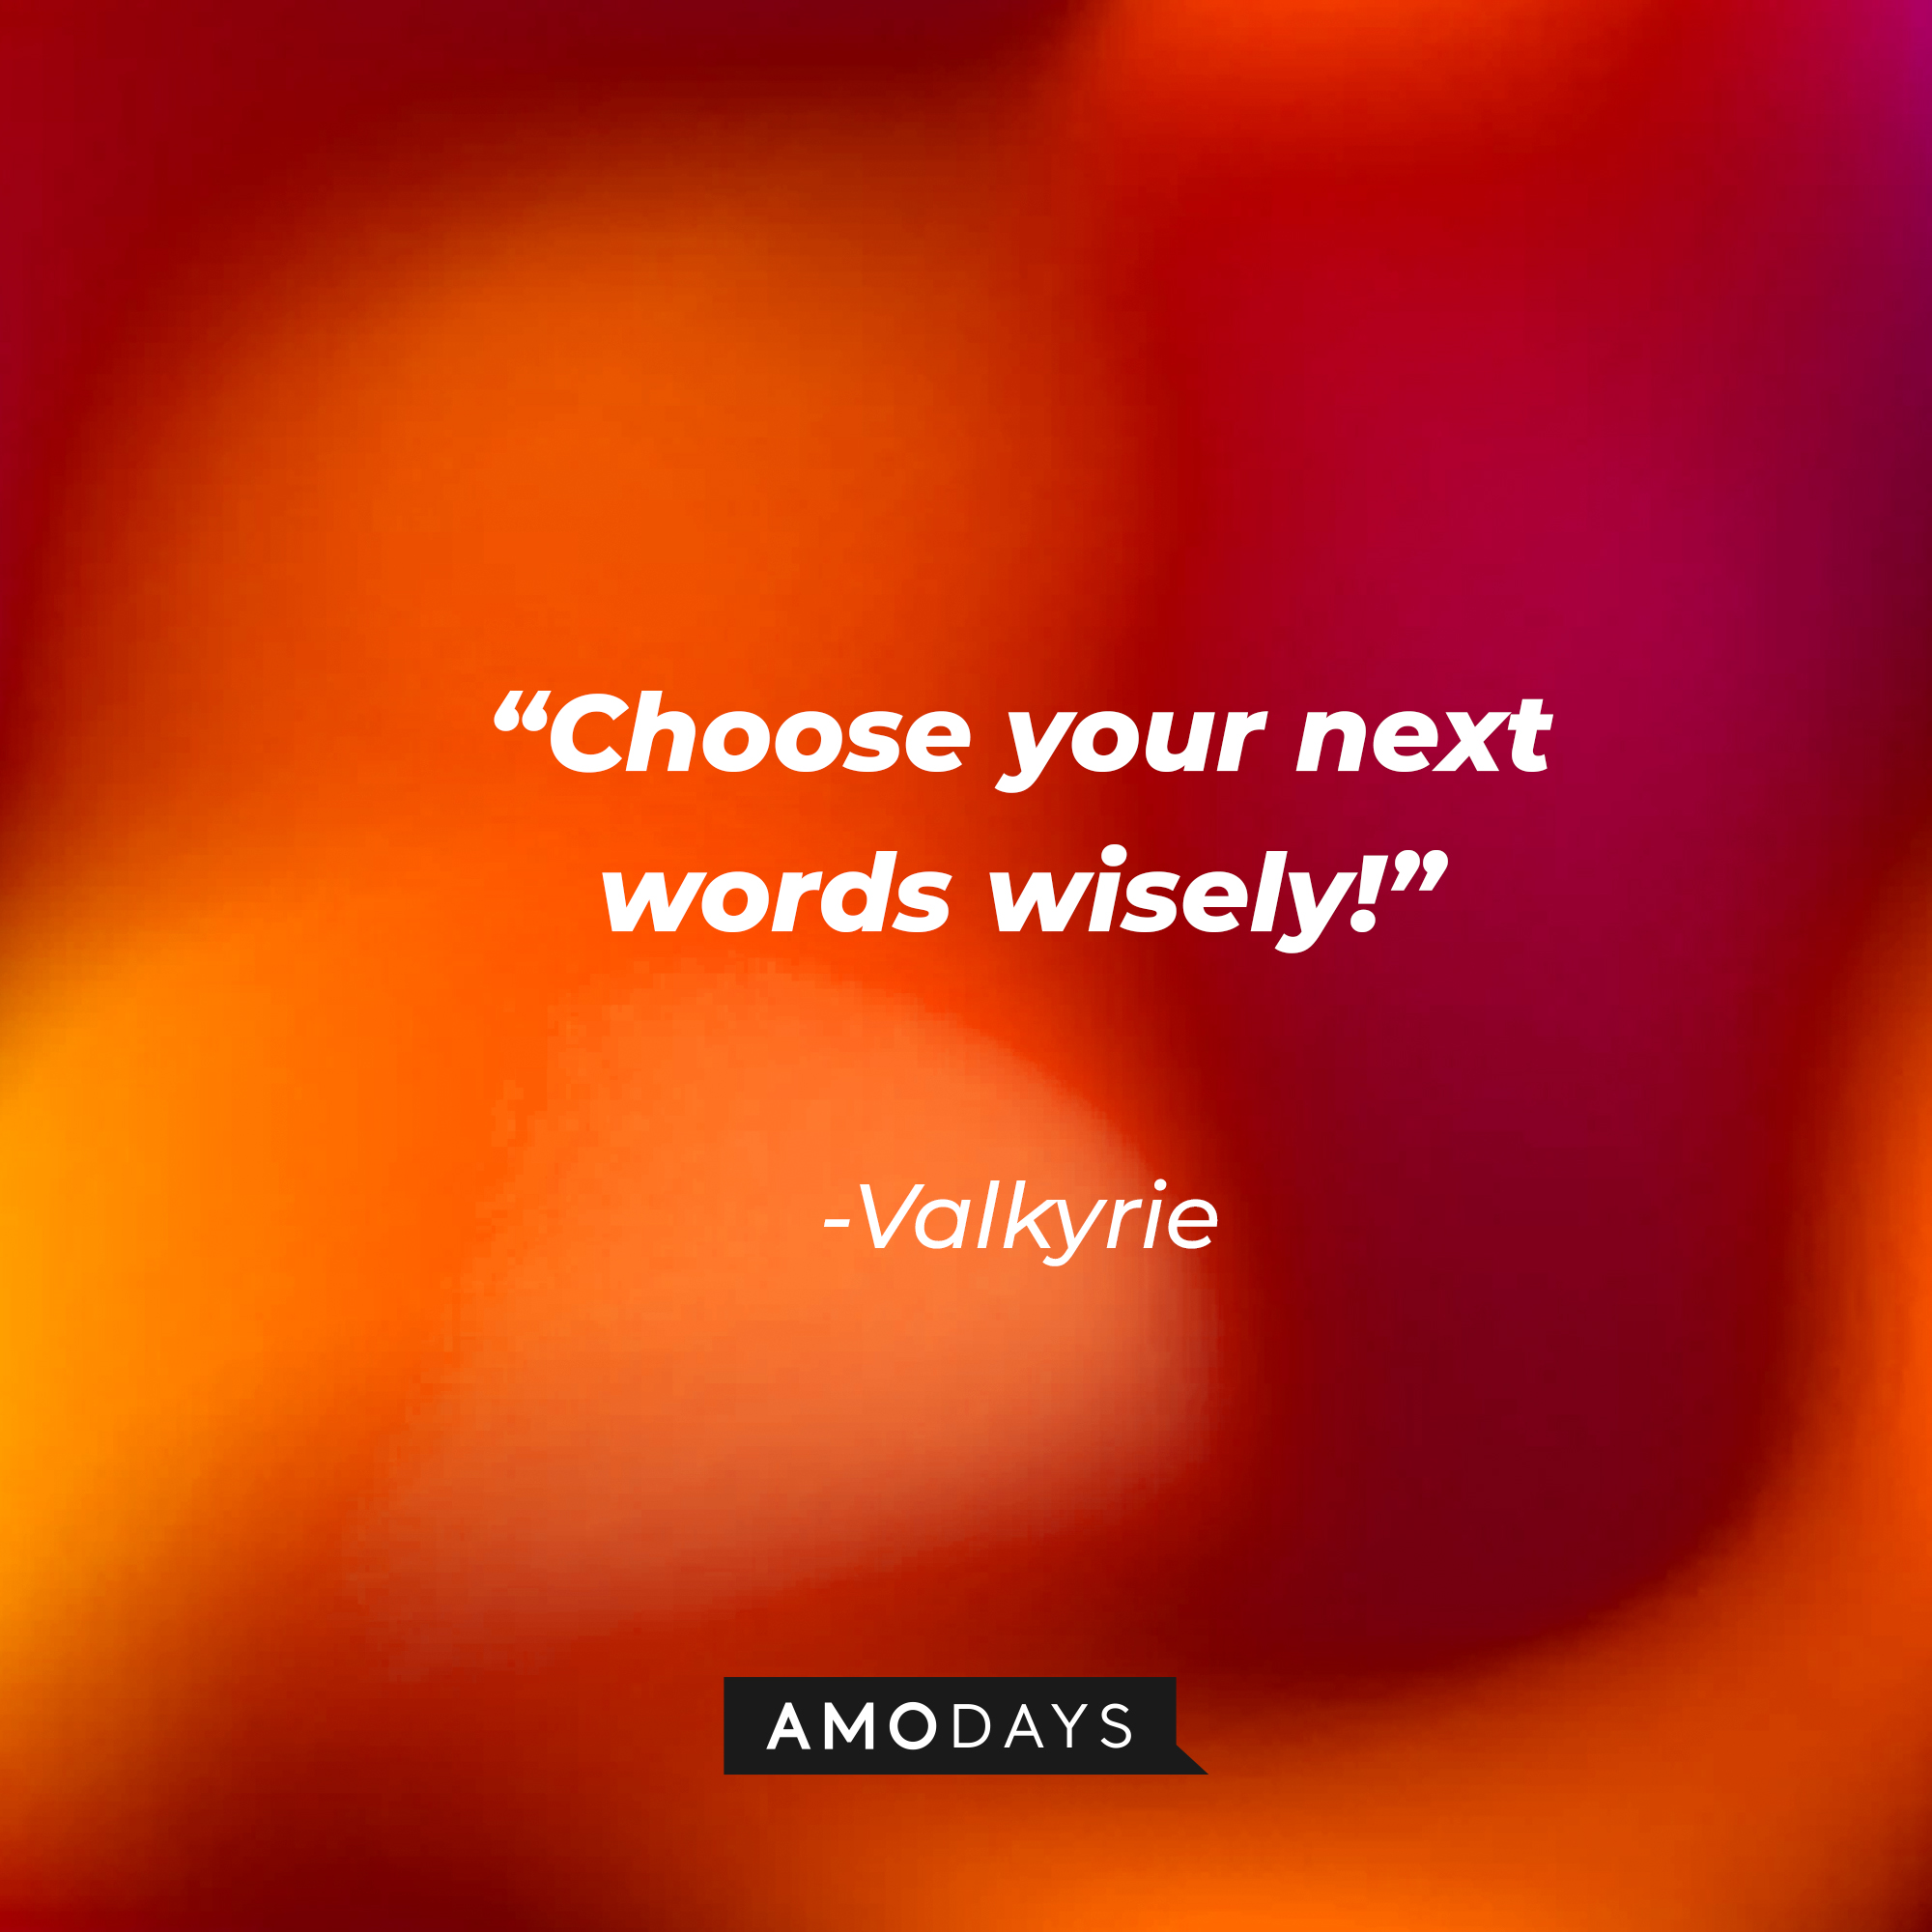 Valkyrie's quote: “Choose your next words wisely!” | Source: Amodays